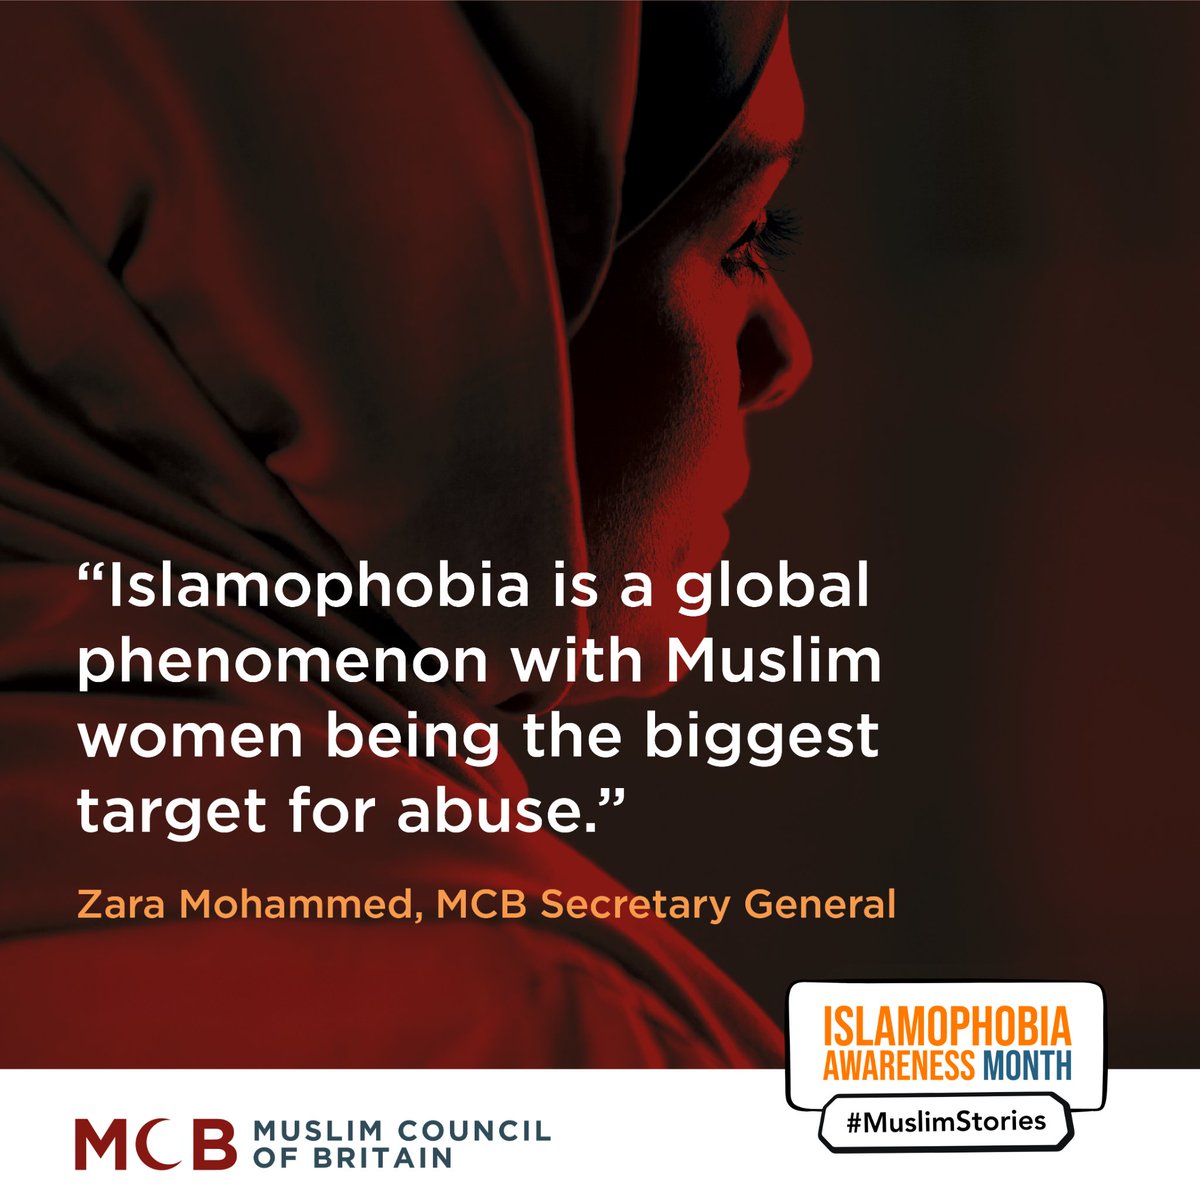 🚨“Islamophobia is a global phenomenon with Muslim women being the biggest target for abuse”. Islamophobic offences have increased 140% in London alone. It’s important to report hate crimes, stay safe and be vigilant. 🔗 mcb.org.uk/islamophobia-a… #IAM2023